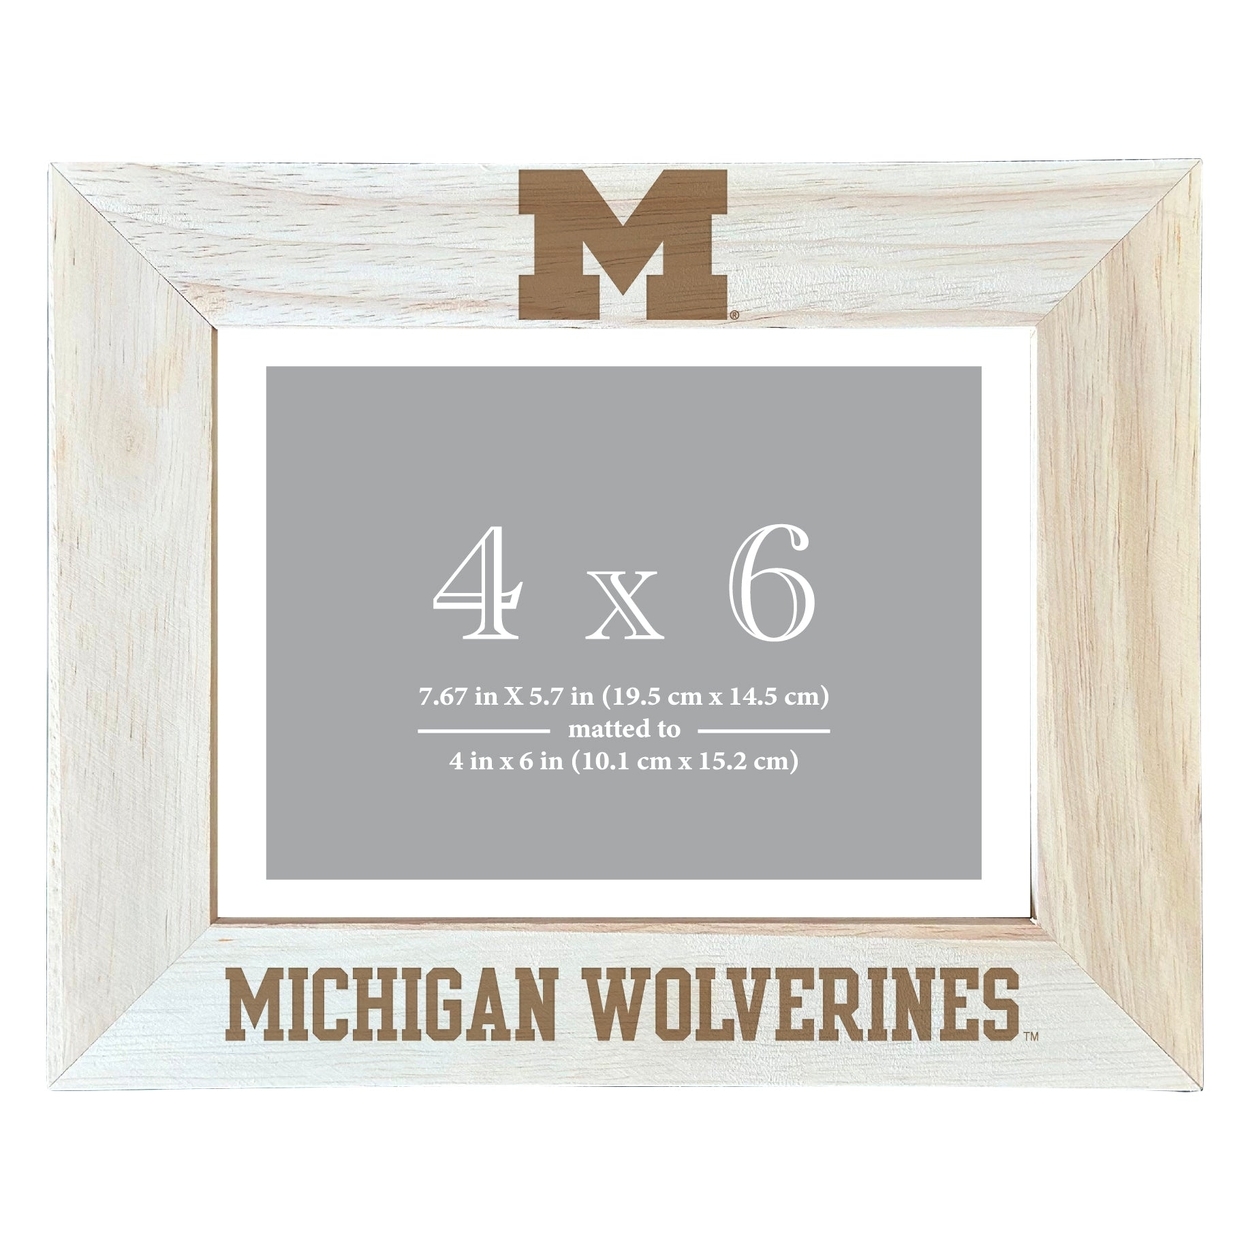 Michigan Wolverines Wooden Photo Frame Matted To 4 X 6 Inch - Etched